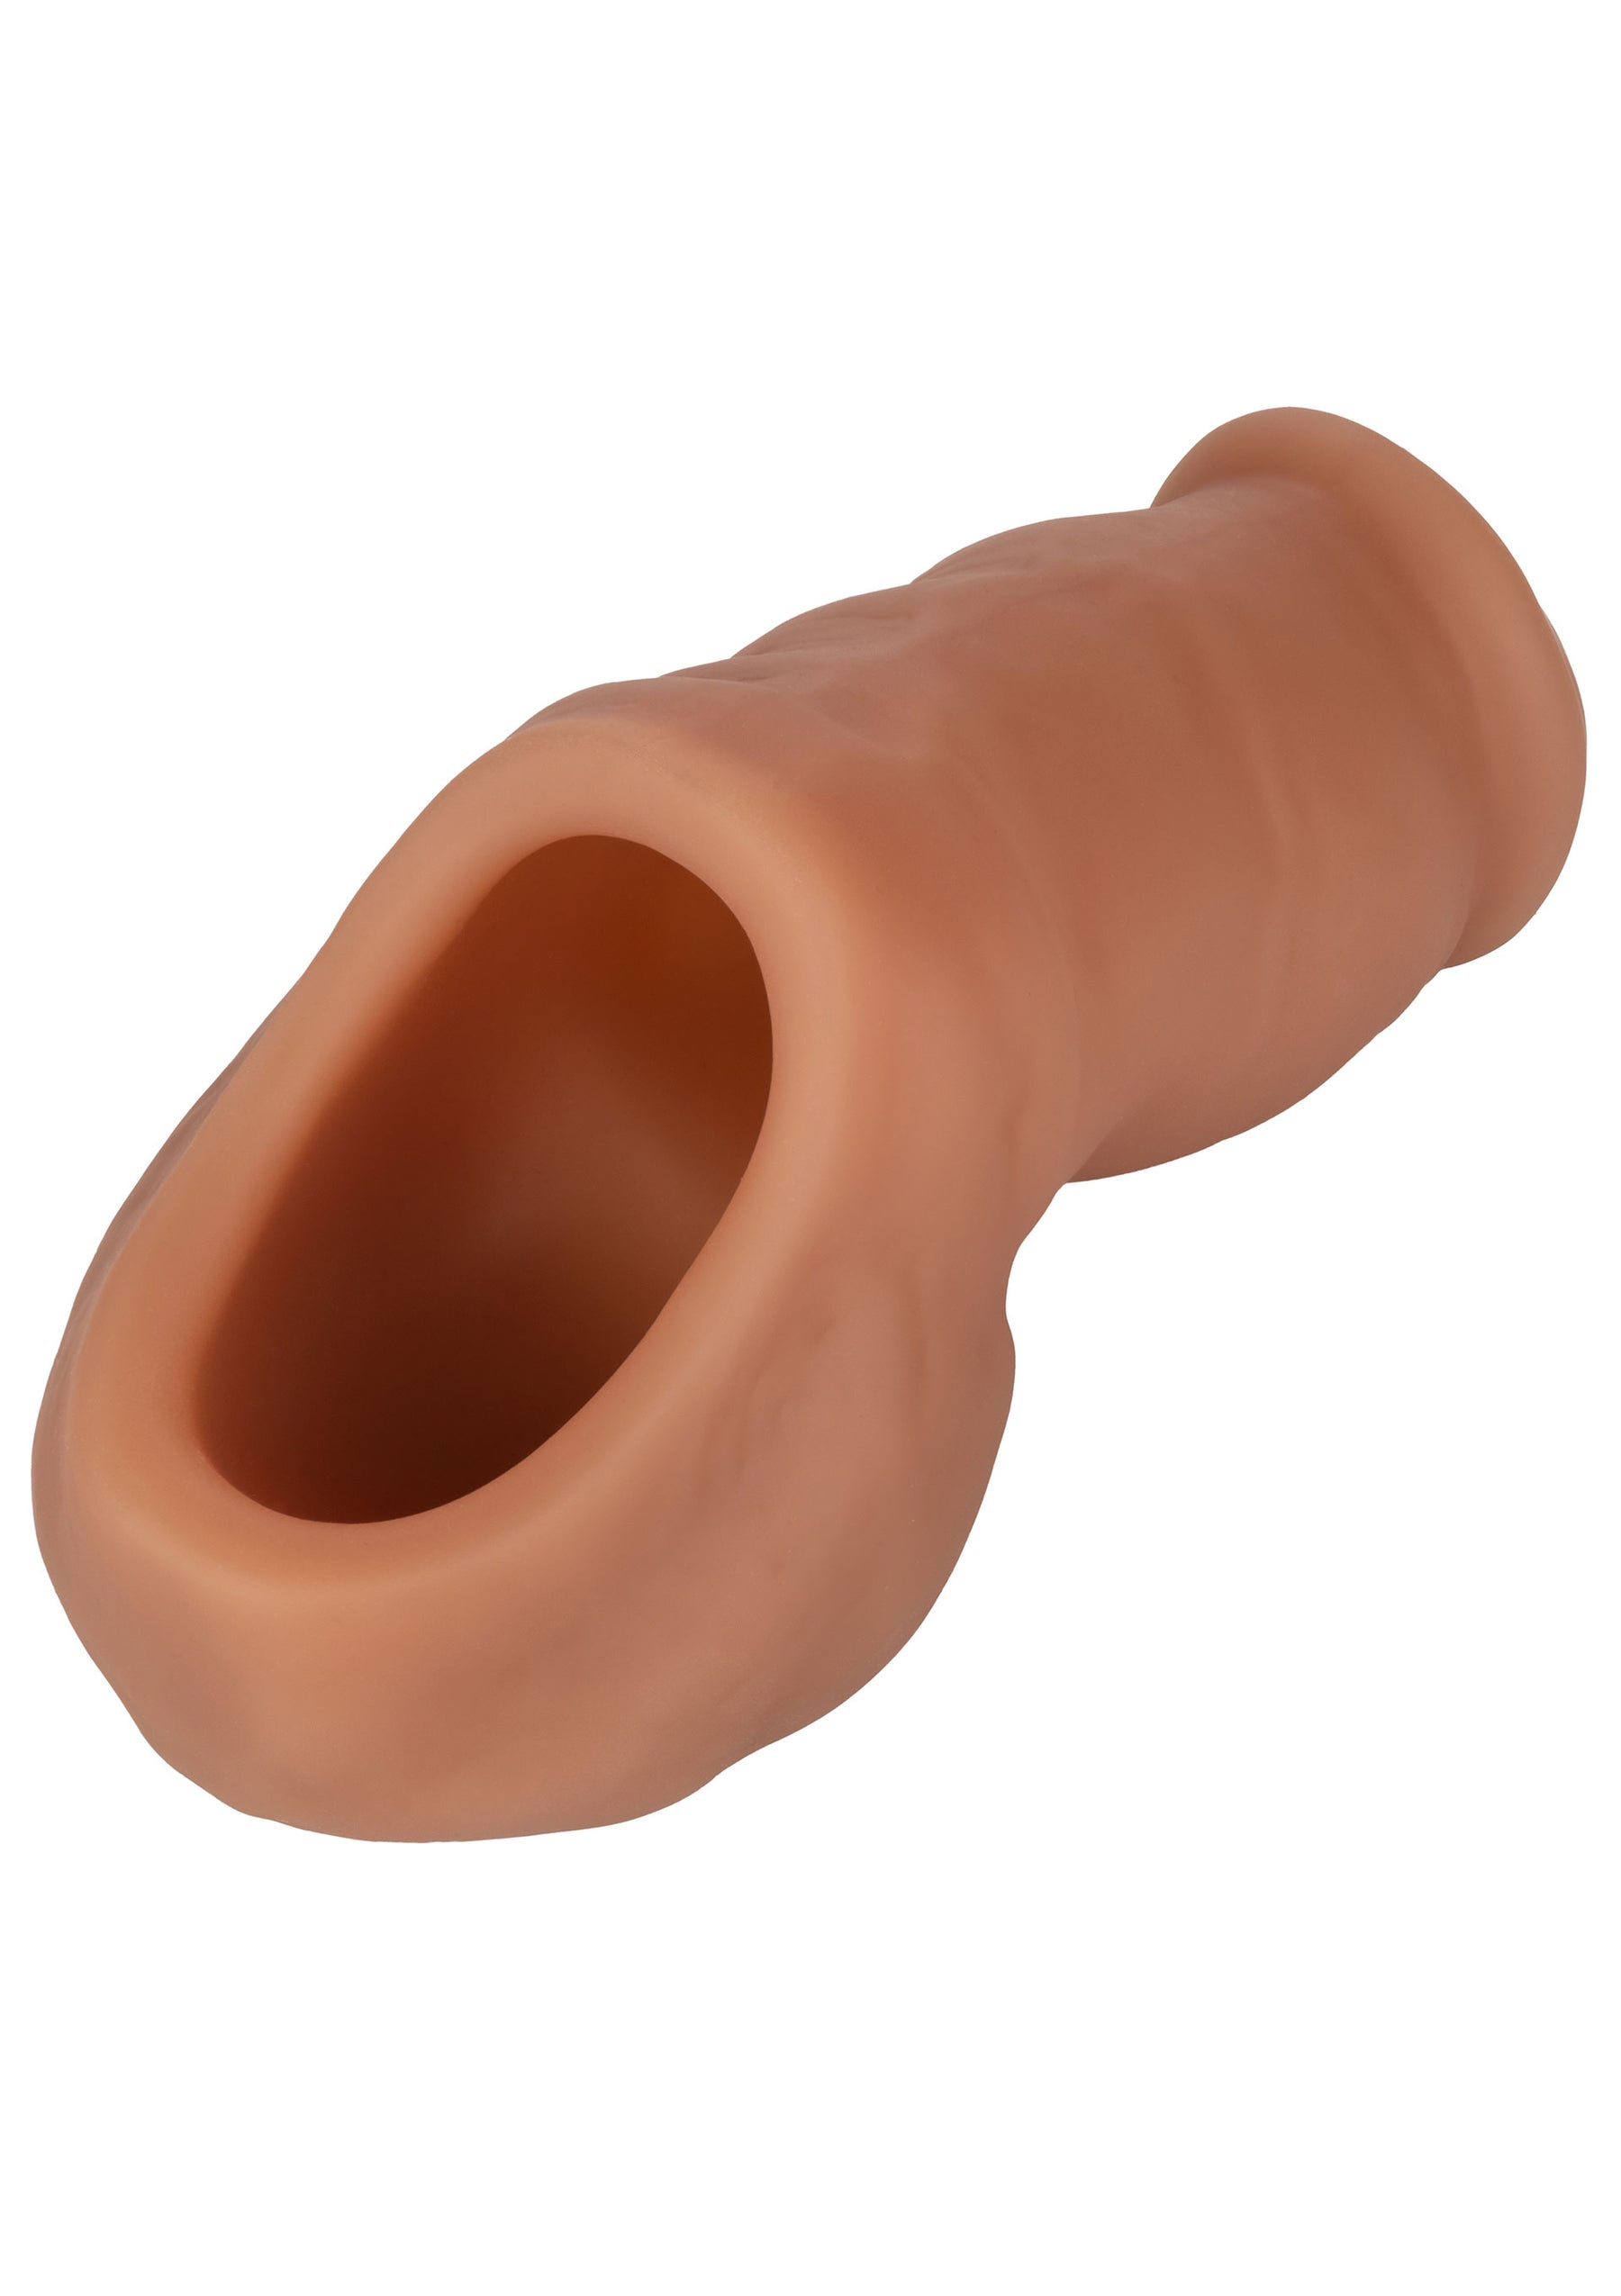 Soft Silicone Stand-To-Pee-erotic-world-munchen.myshopify.com